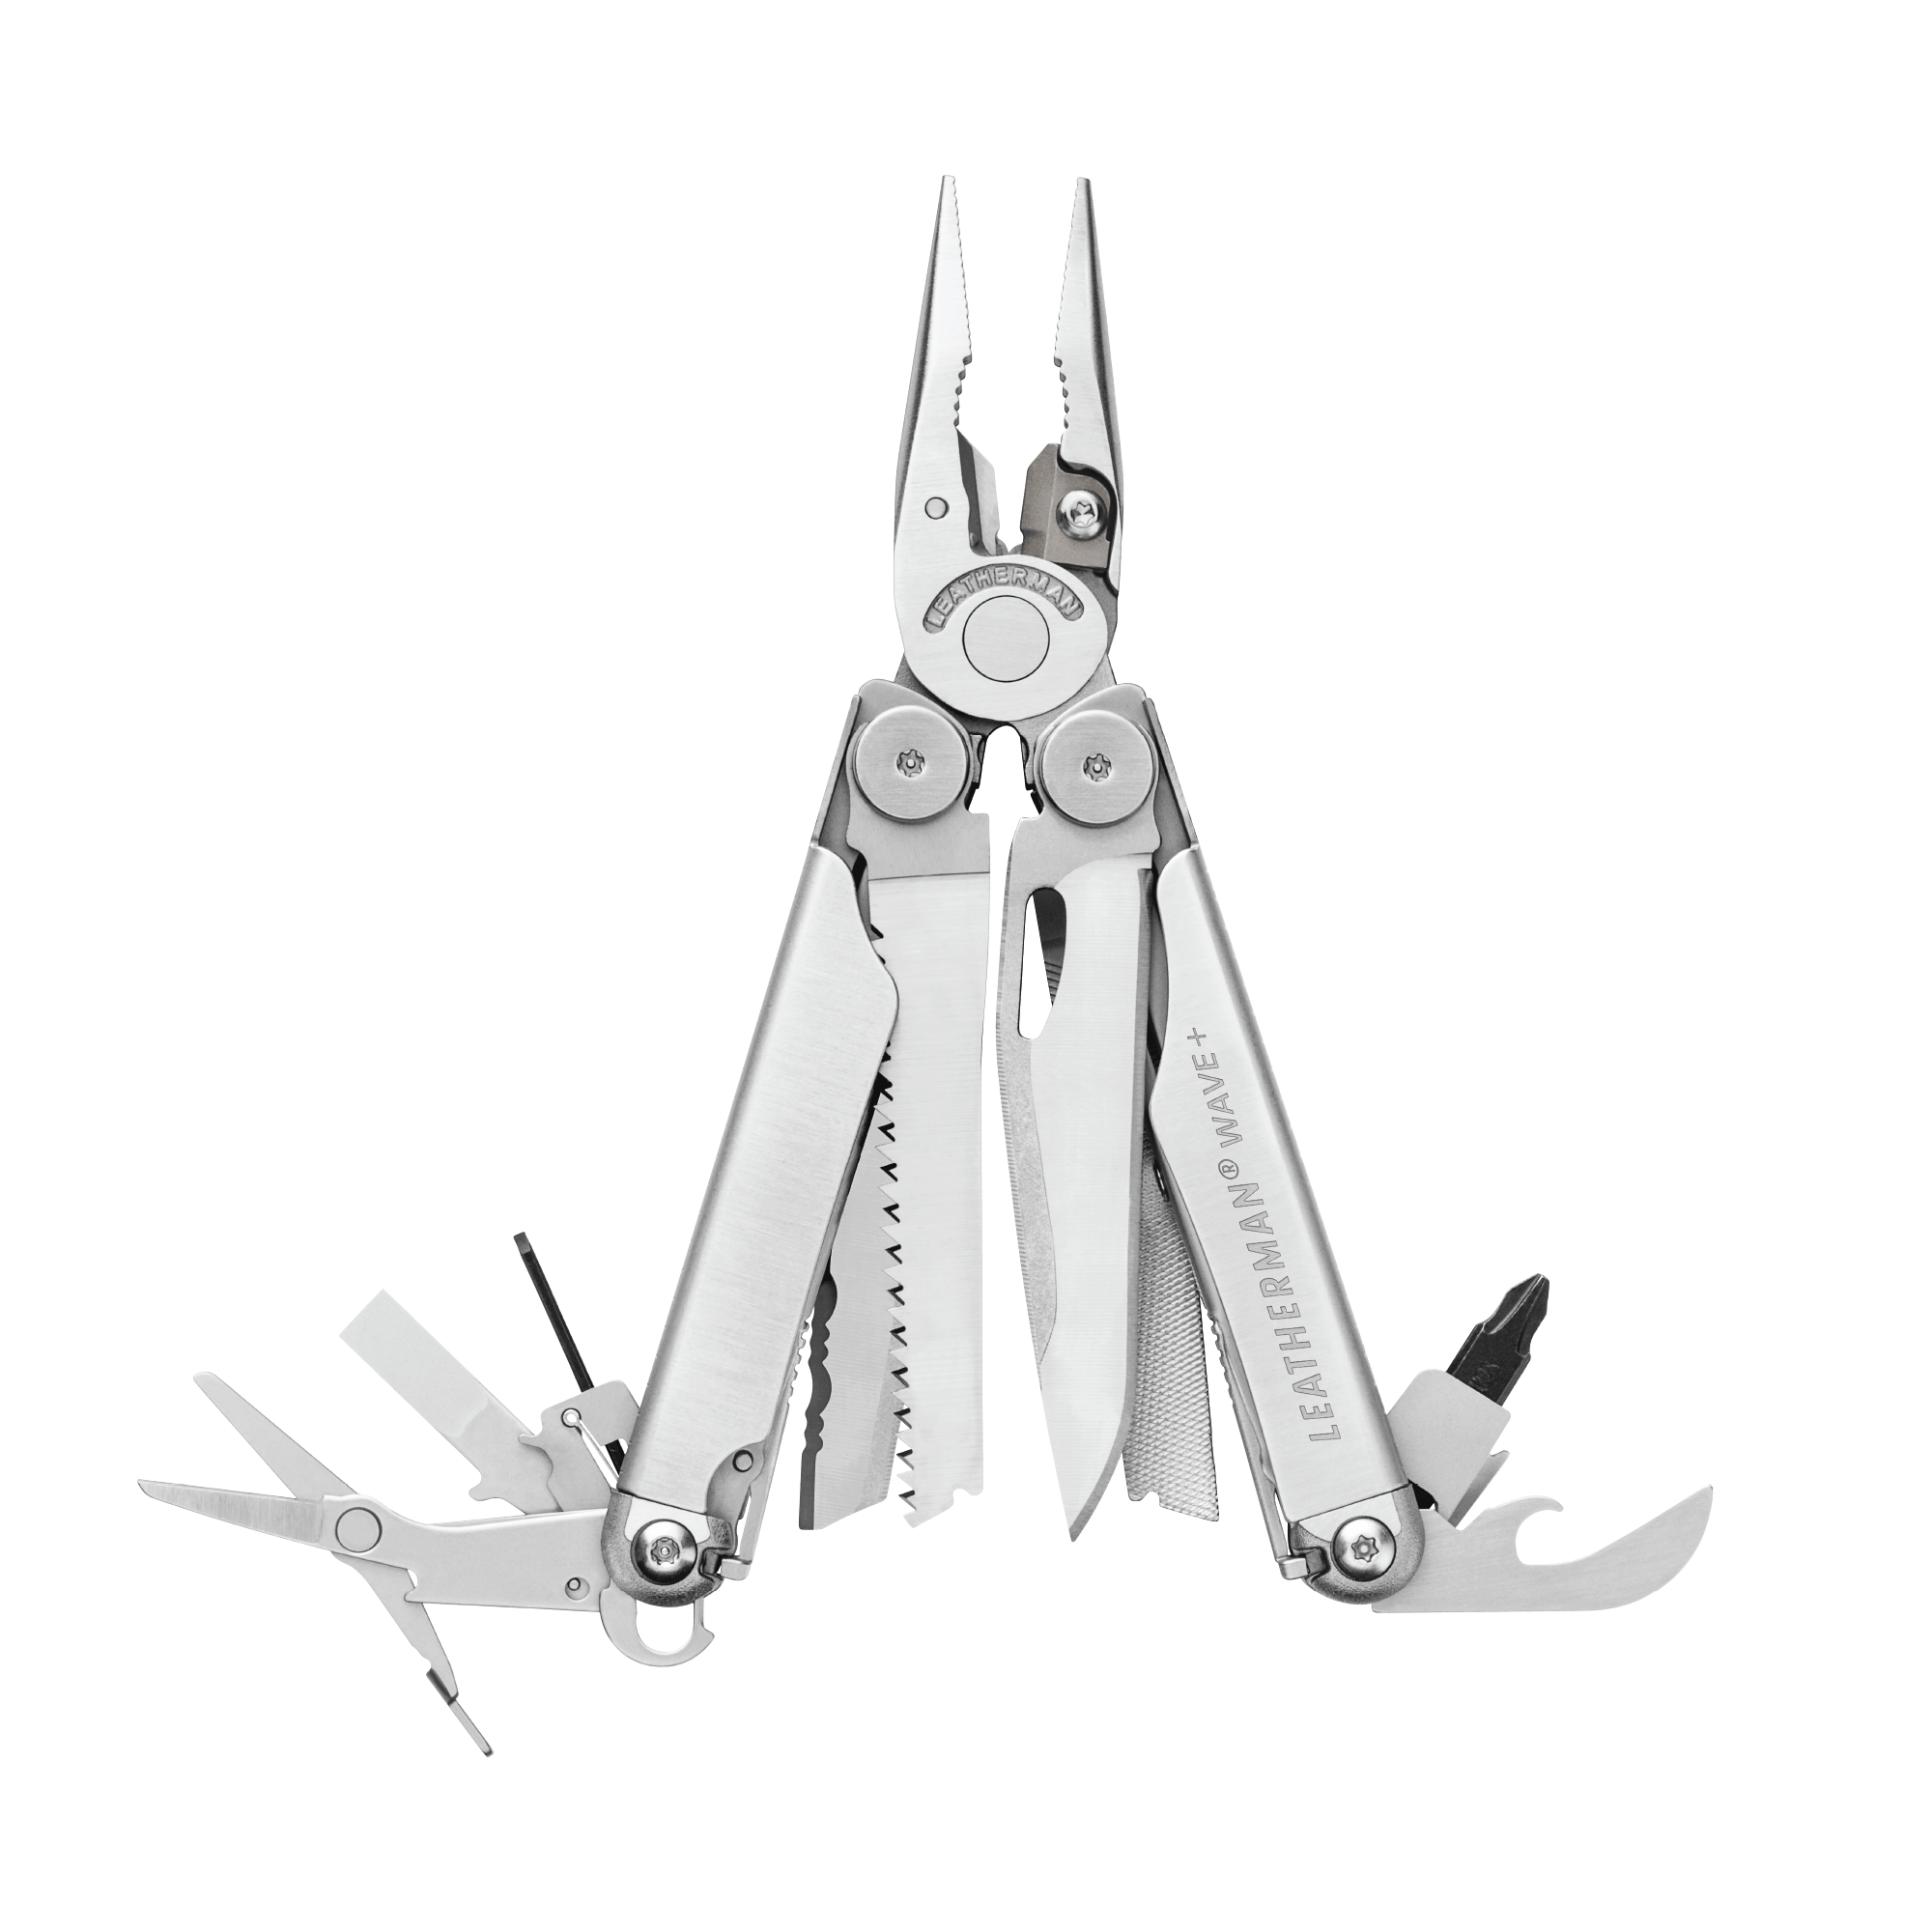 Leatherman Wave Plus Multi Tool Stainless Steel Open View 17 Tools